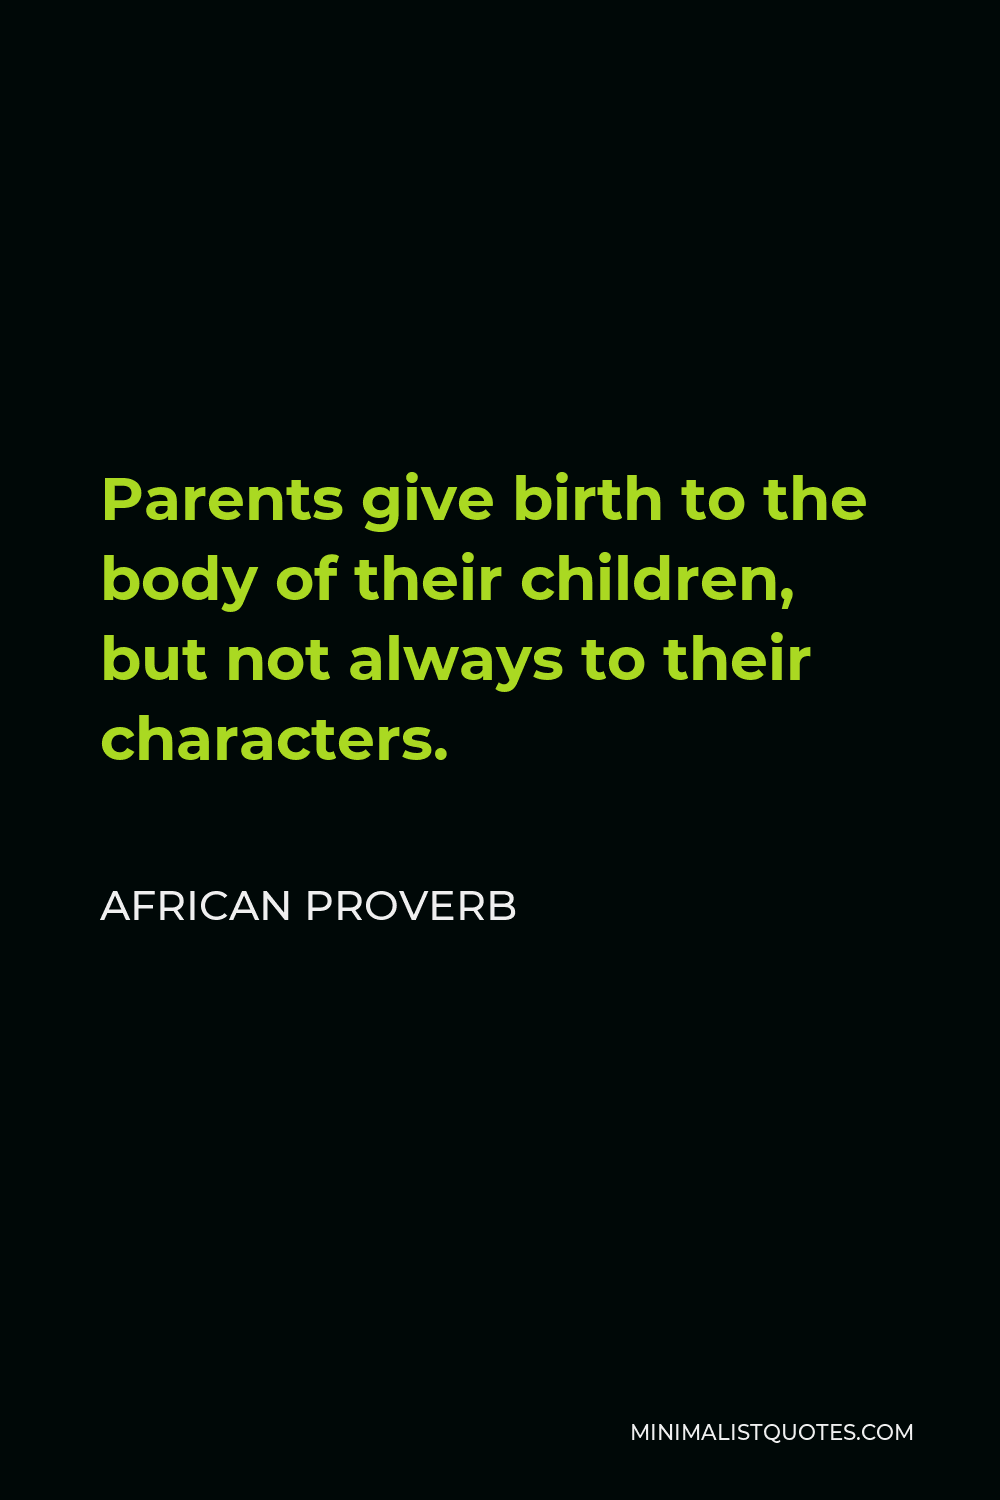 African Proverb Quote - Parents give birth to the body of their children, but not always to their characters.